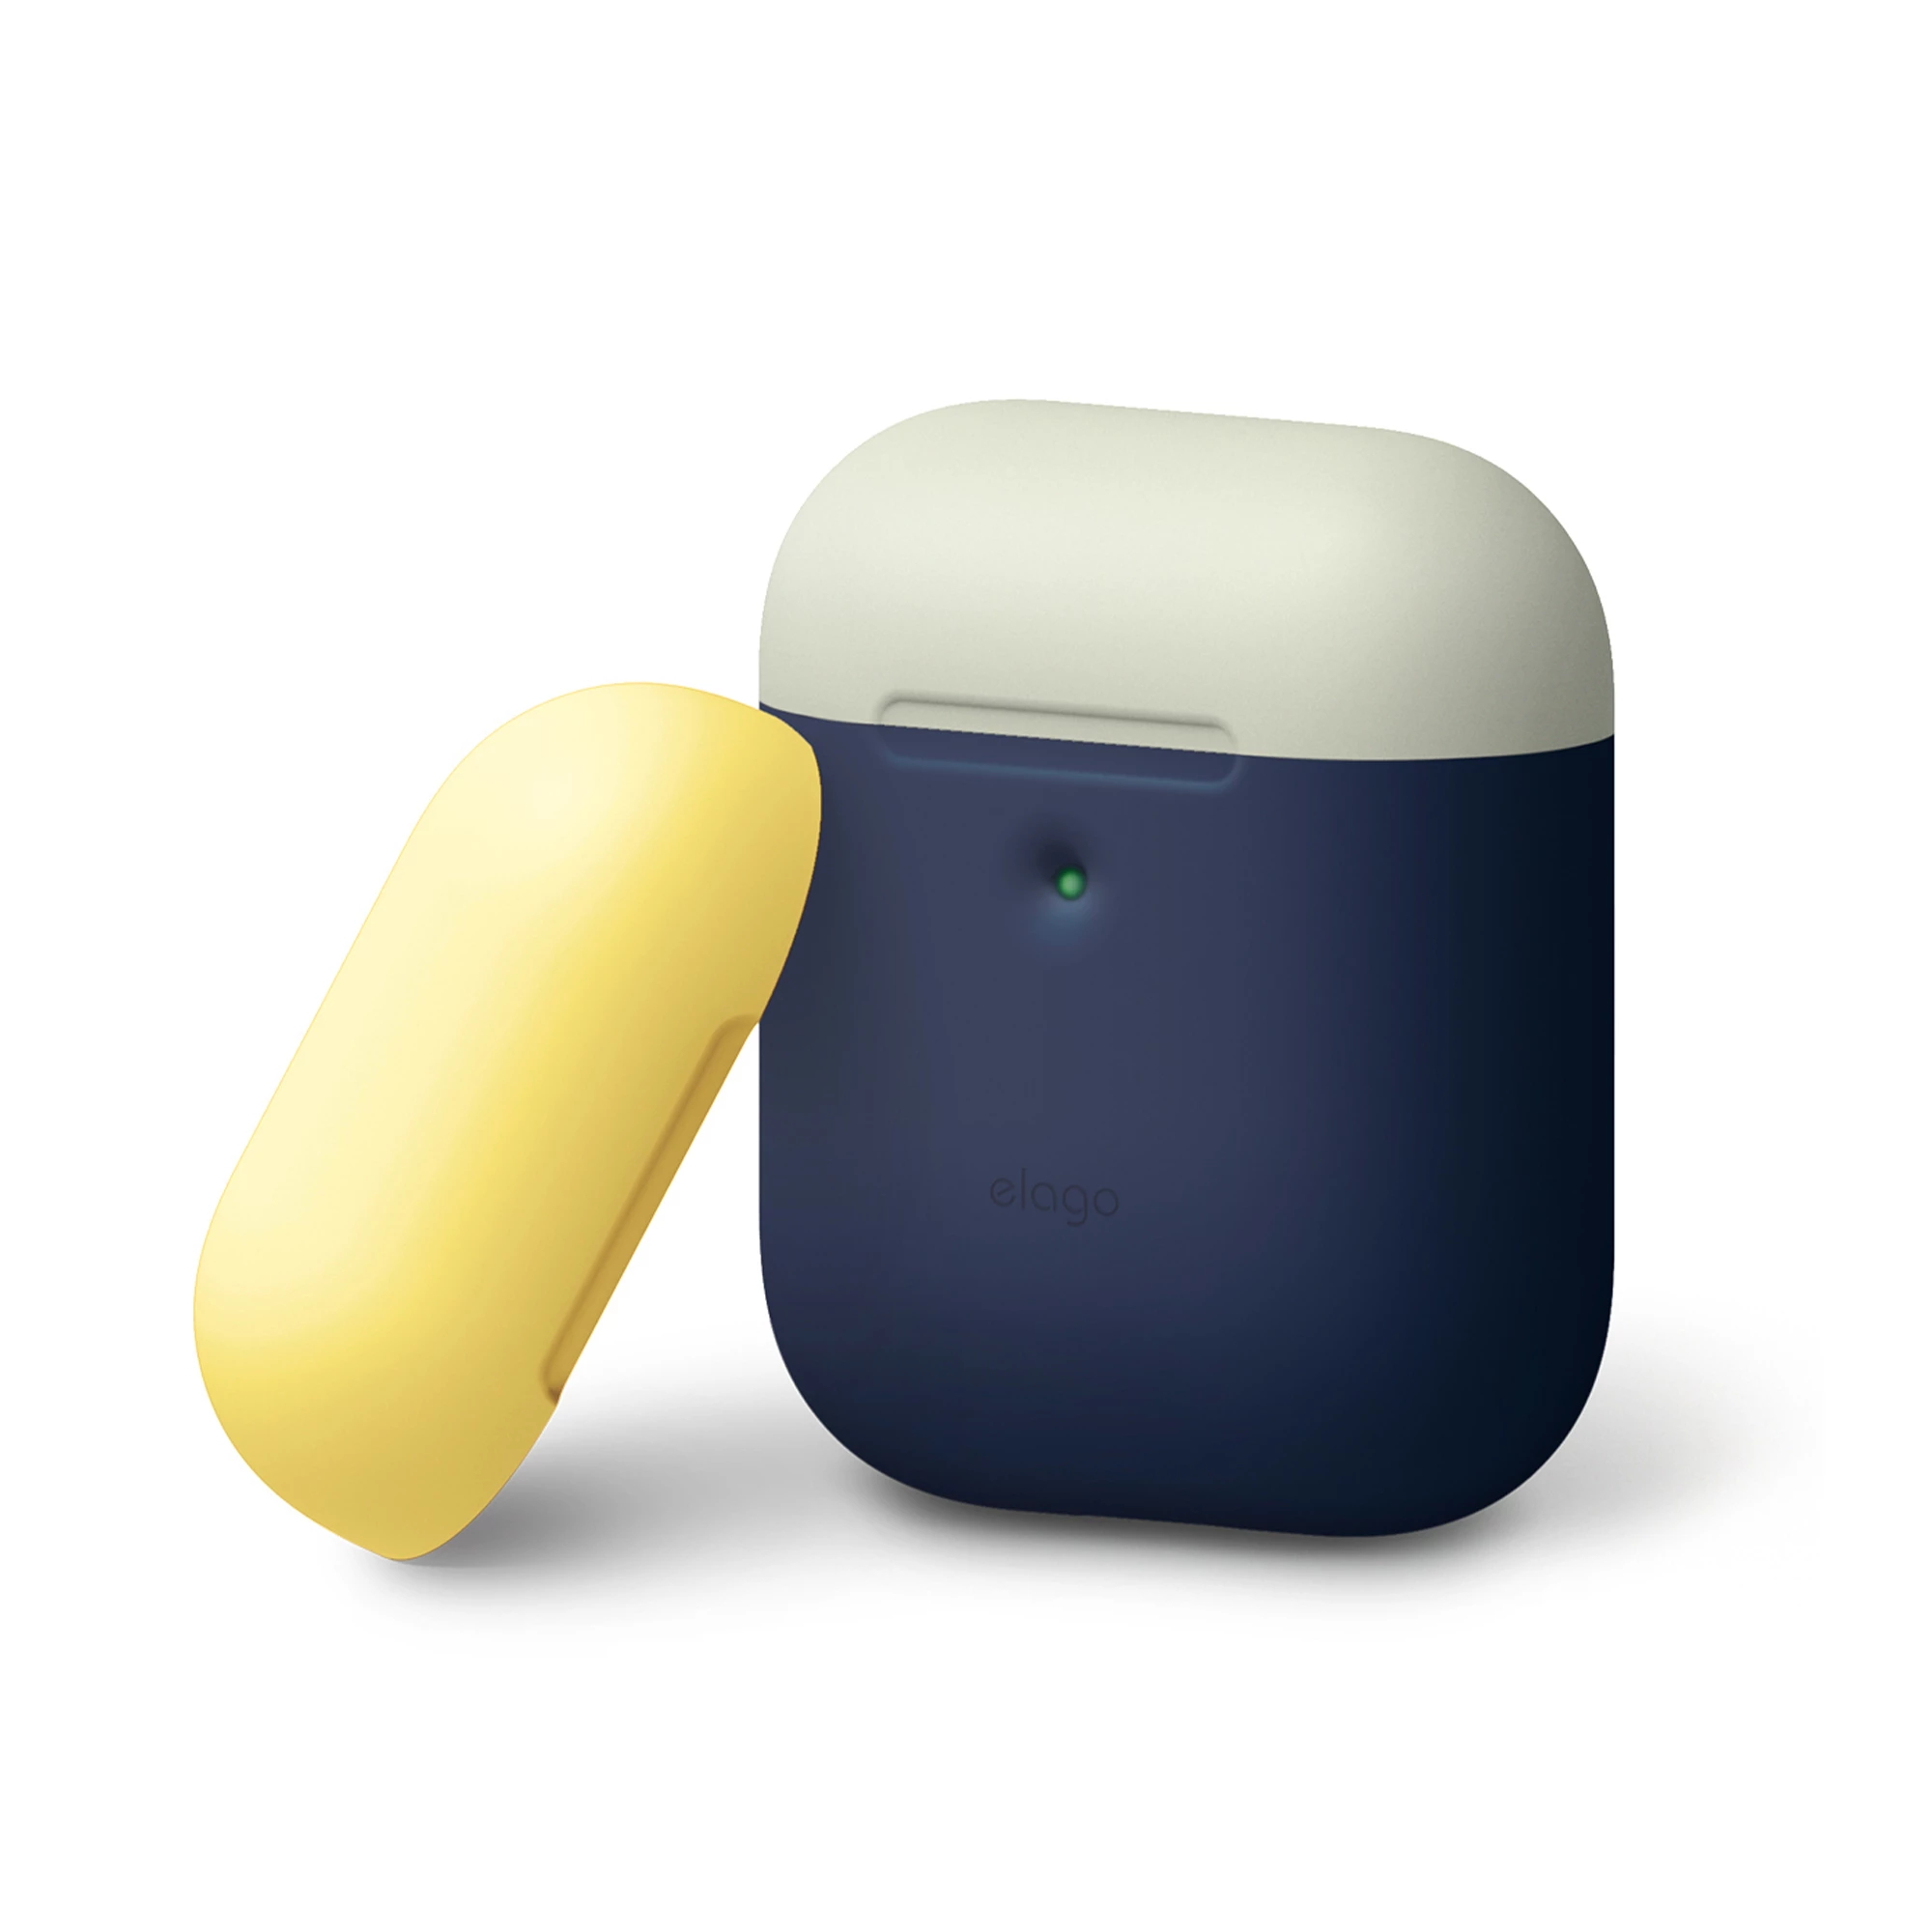 Elago A2 Duo Case Indigo / Classic White / Yellow for Airpods with Wireless Charging Case (EAP2DO-JIN-CWHYE)